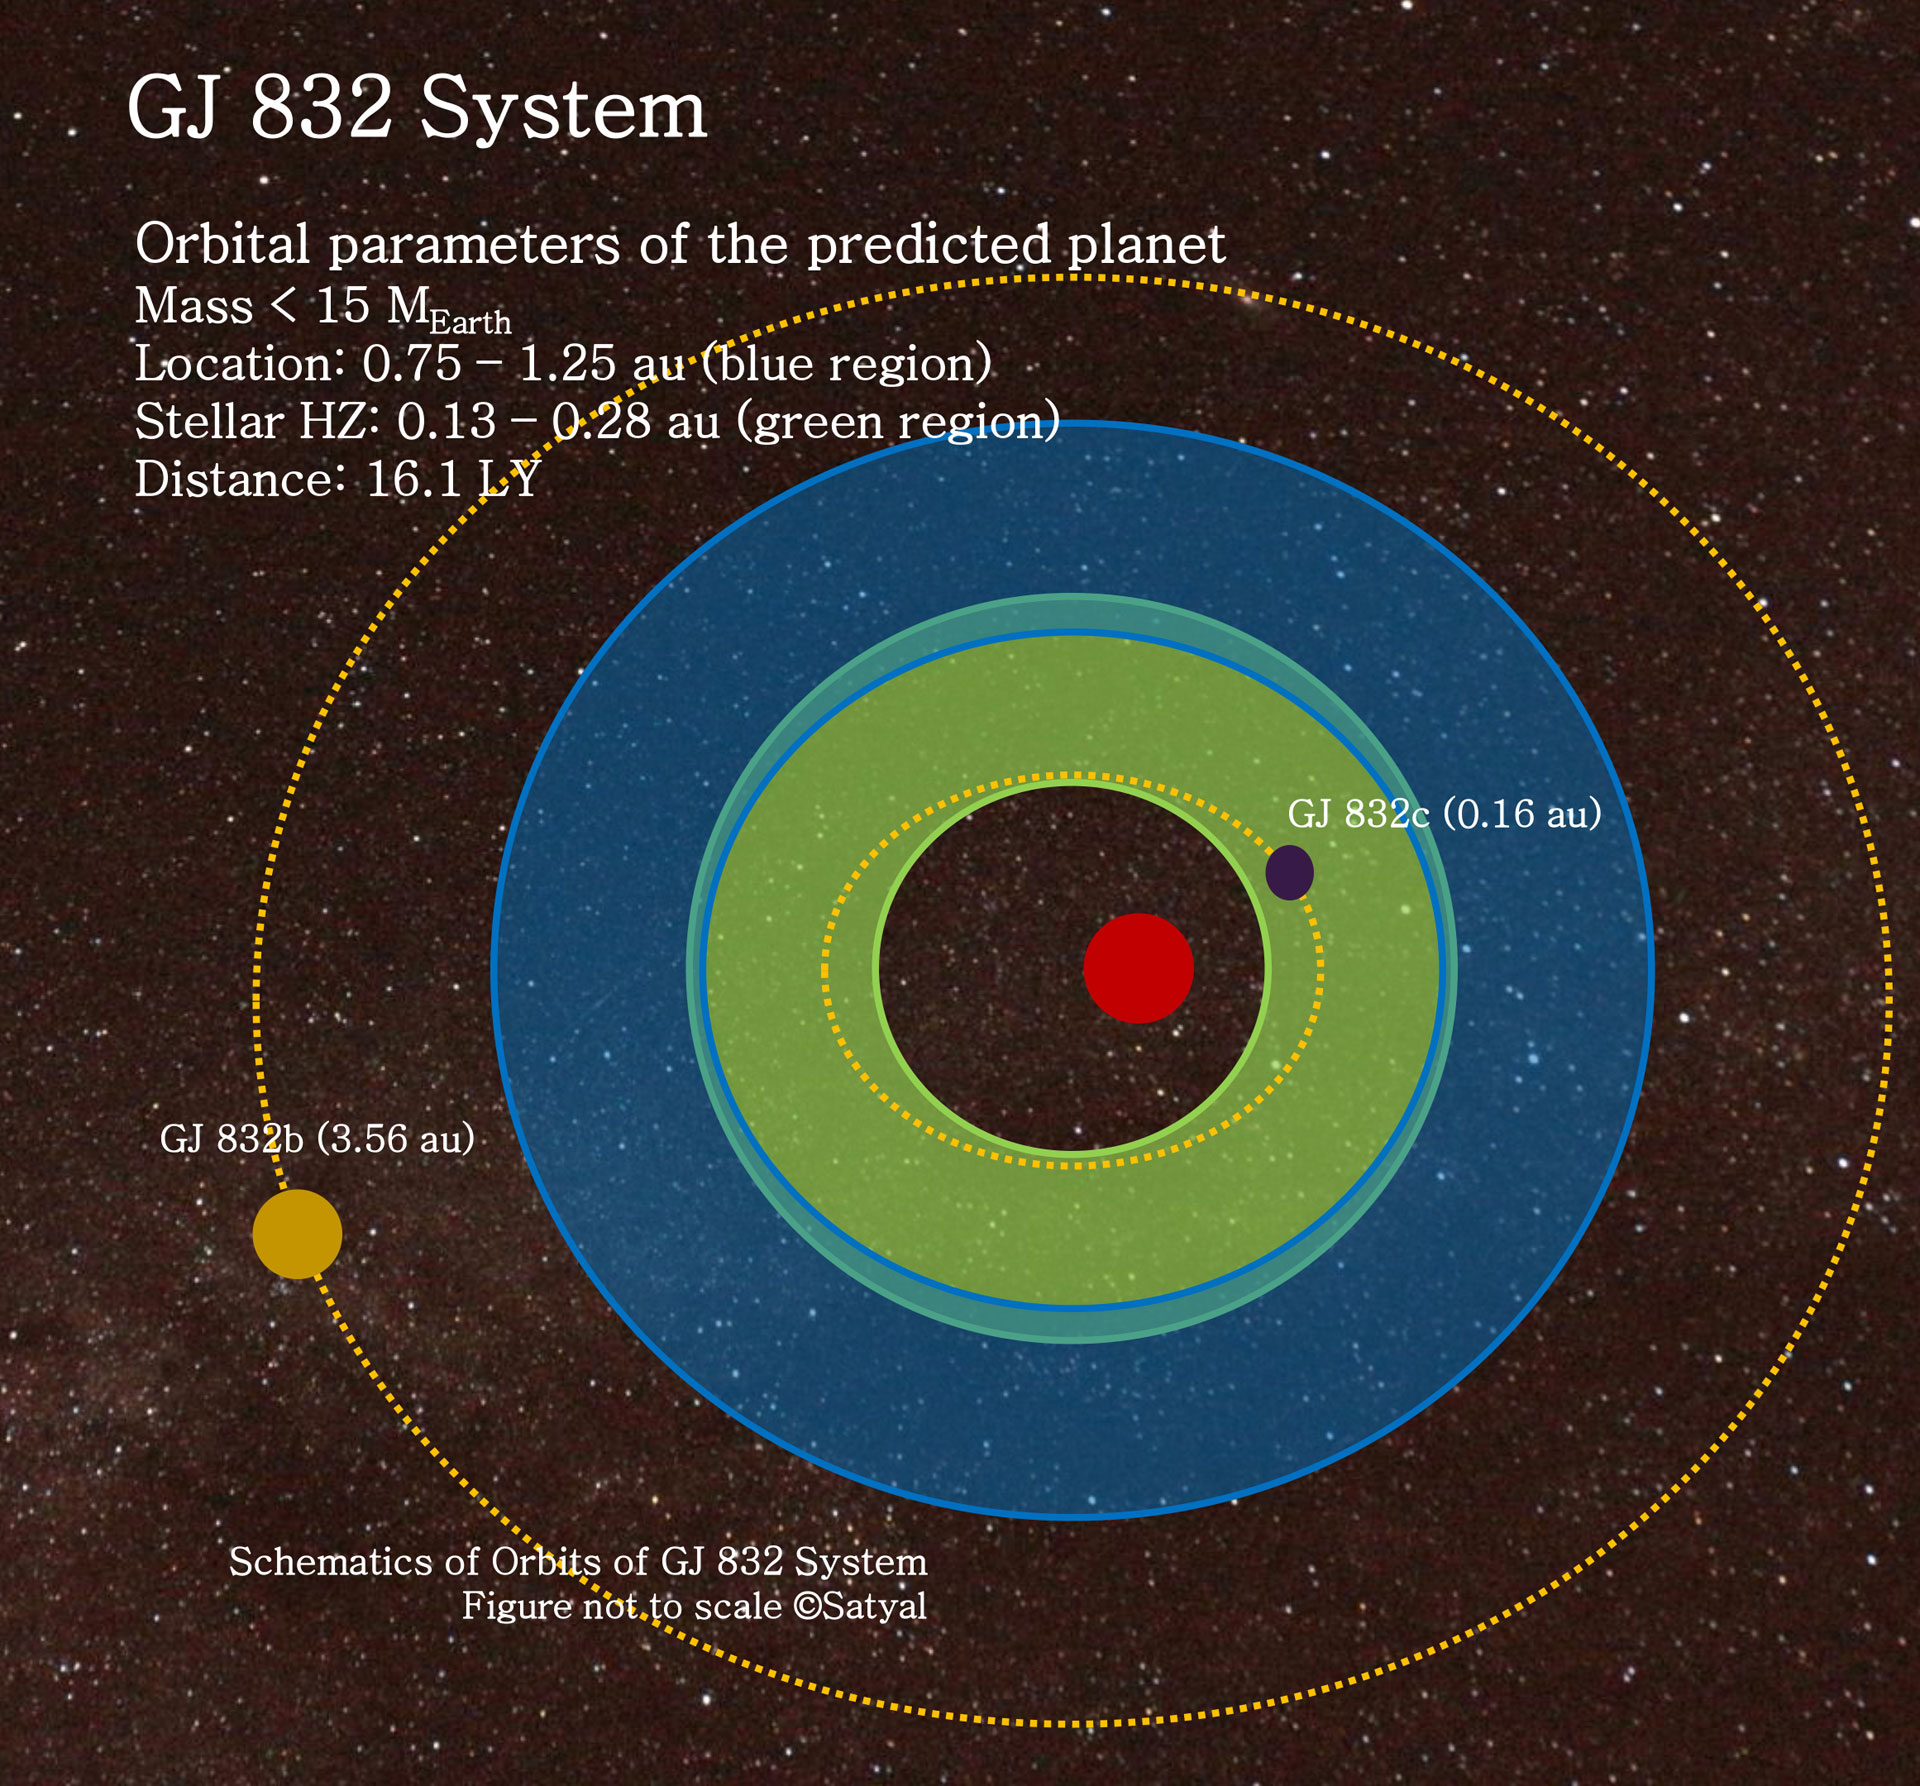 Astronomers Believe Earth-Like Planet May Exist in GJ 832 System